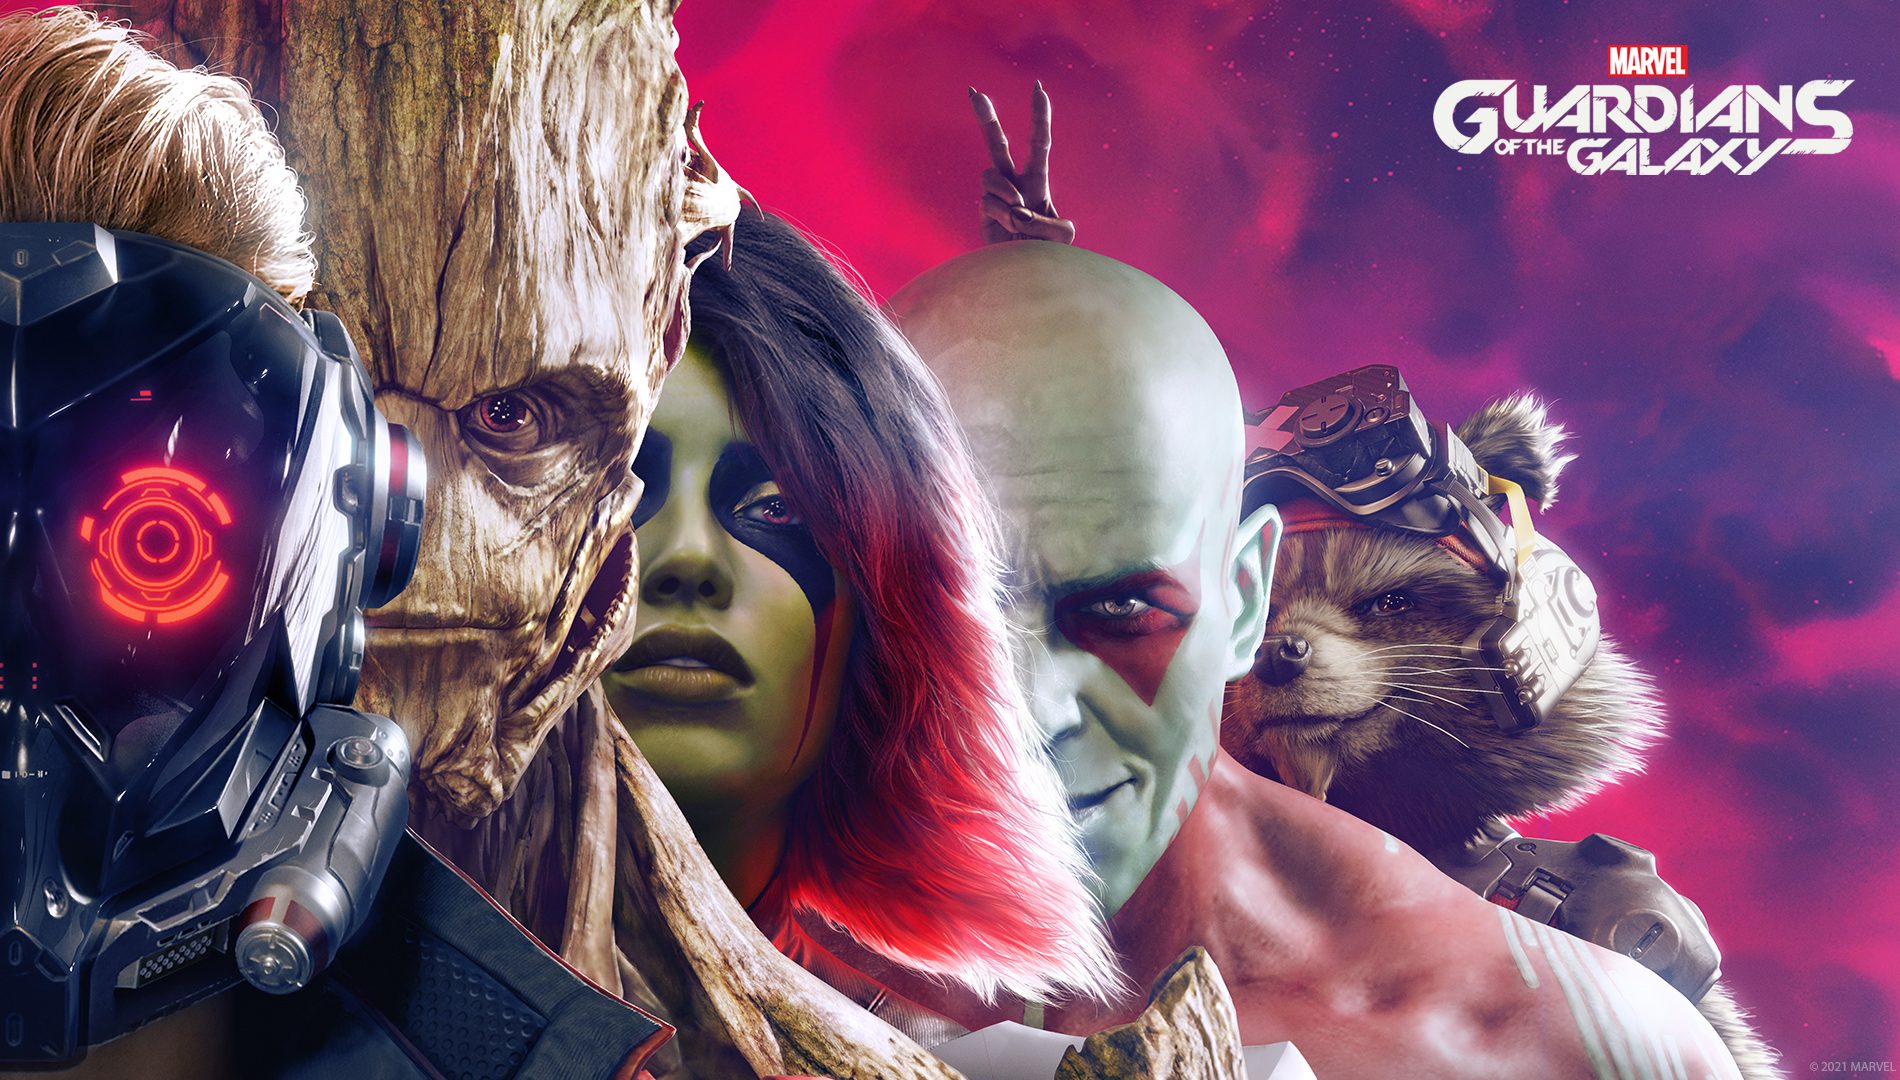 New Story Trailer Released For Marvel’s Guardians Of The Galaxy, Alongside Single From Star-Lord Band